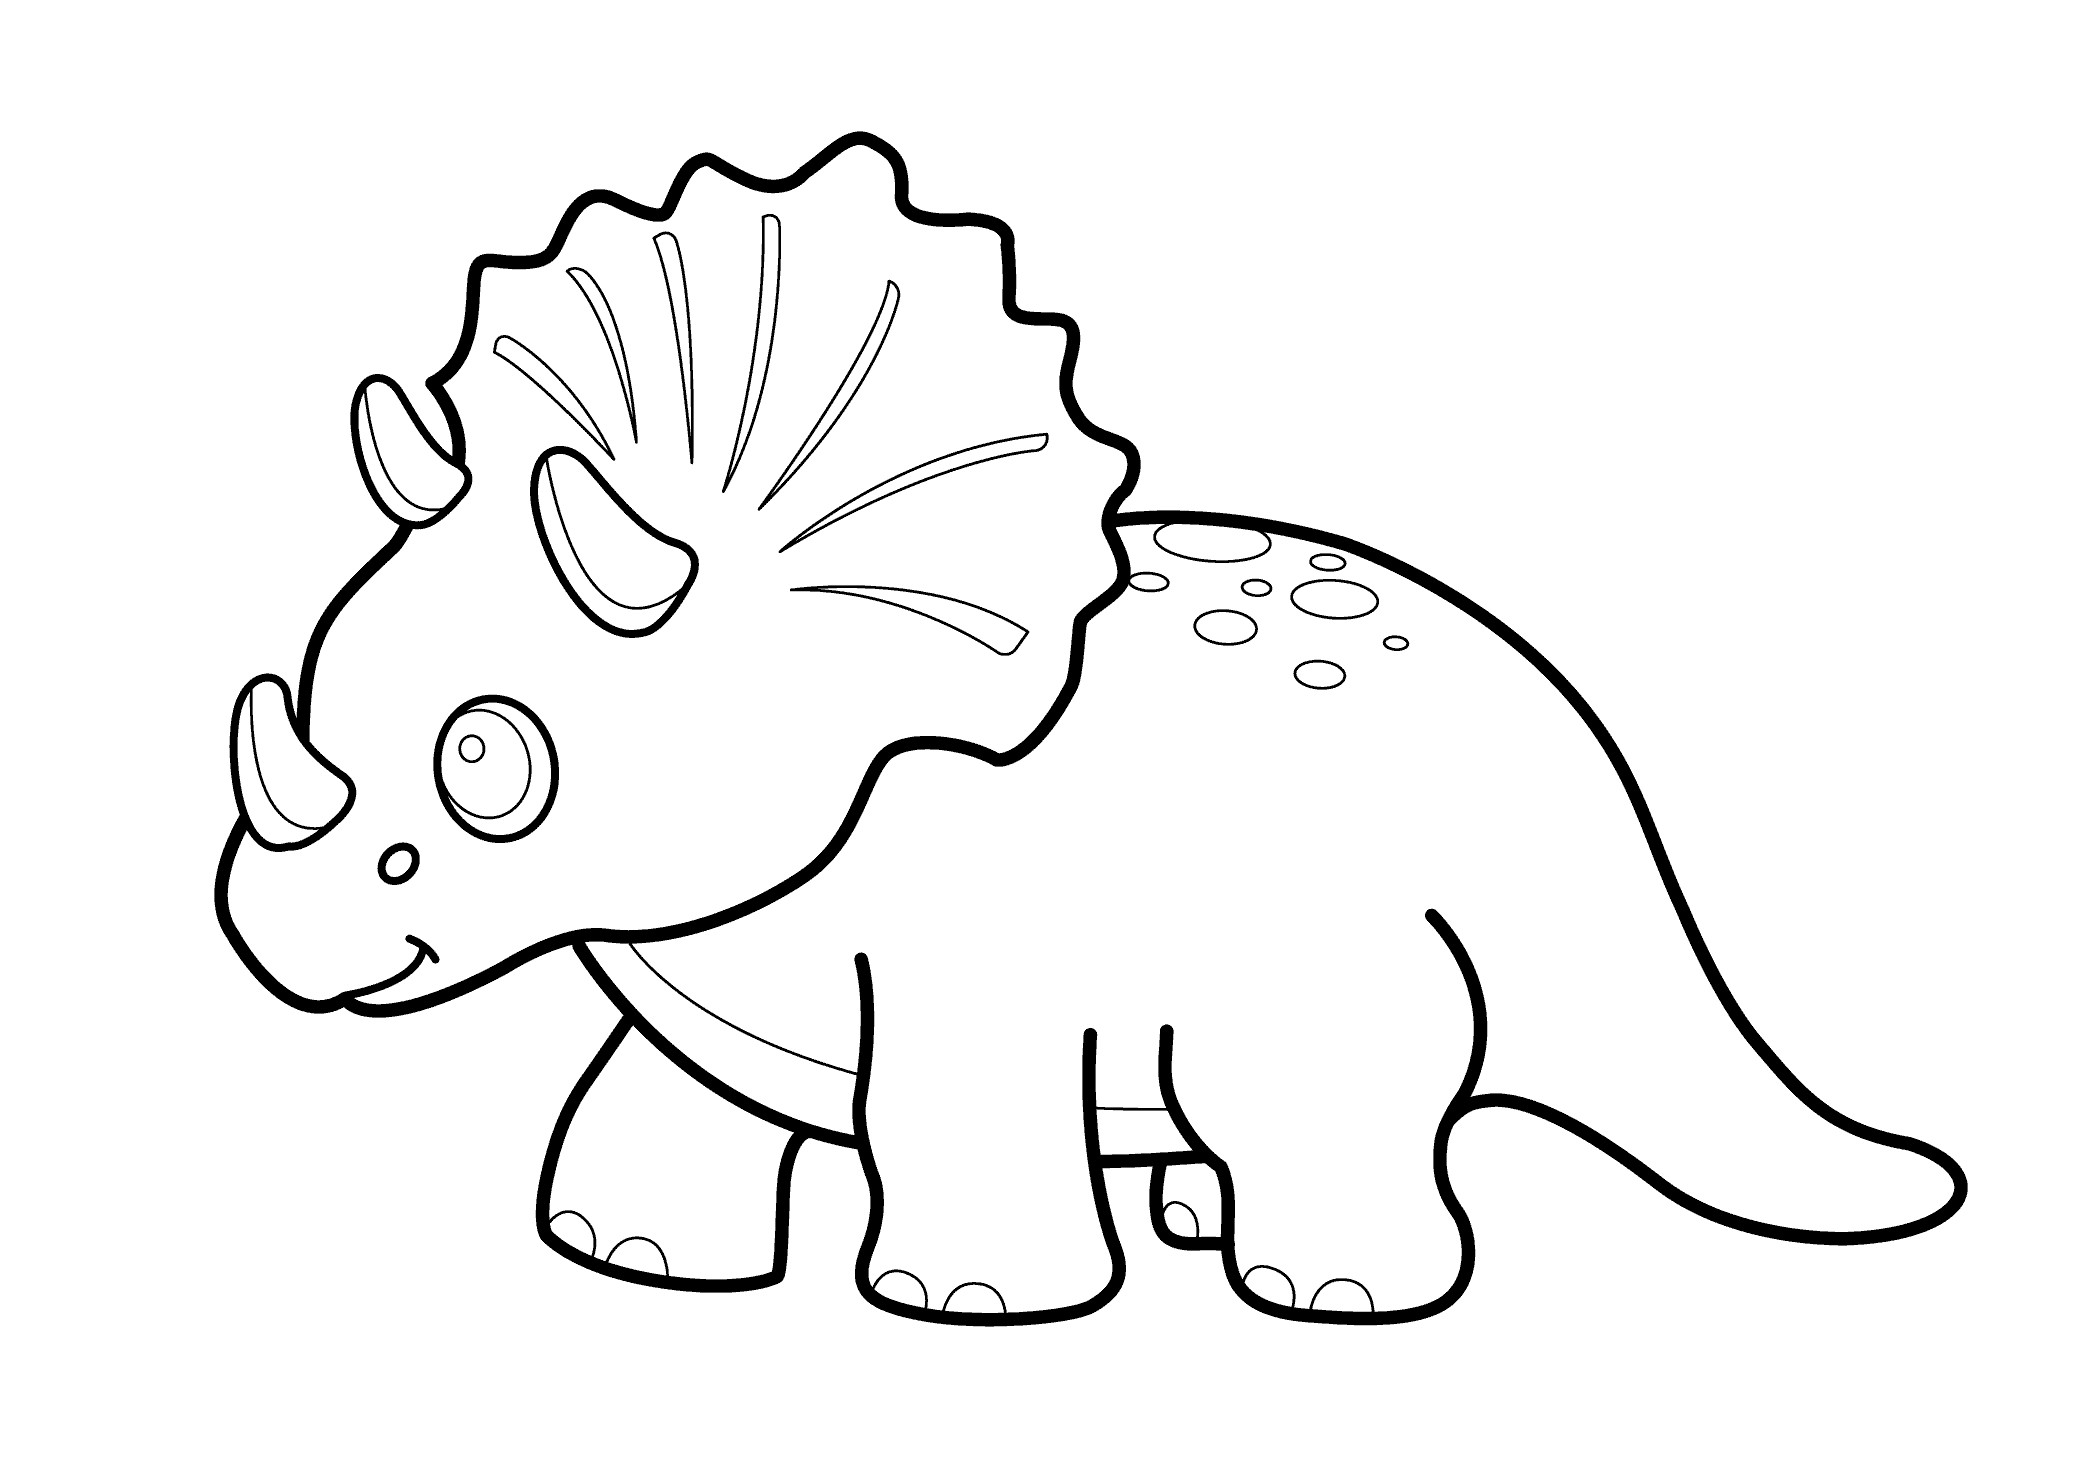 Dinosaur Coloring Pages For Toddlers
 Funny dinosaur triceratops cartoon coloring pages for kids